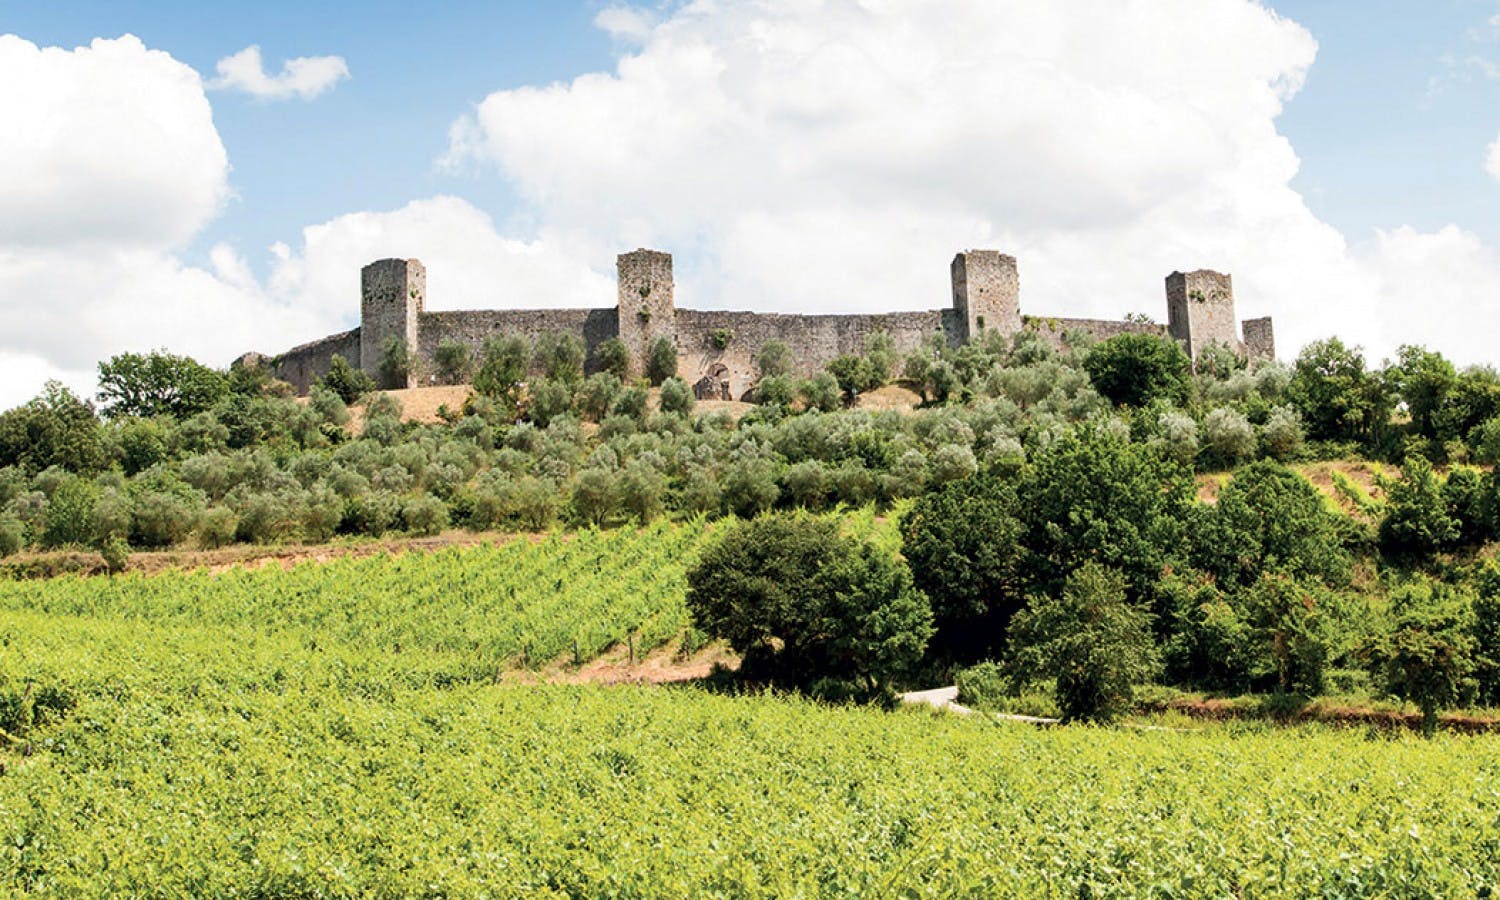 Chianti and castel tour from Siena with wine and food tasting-4